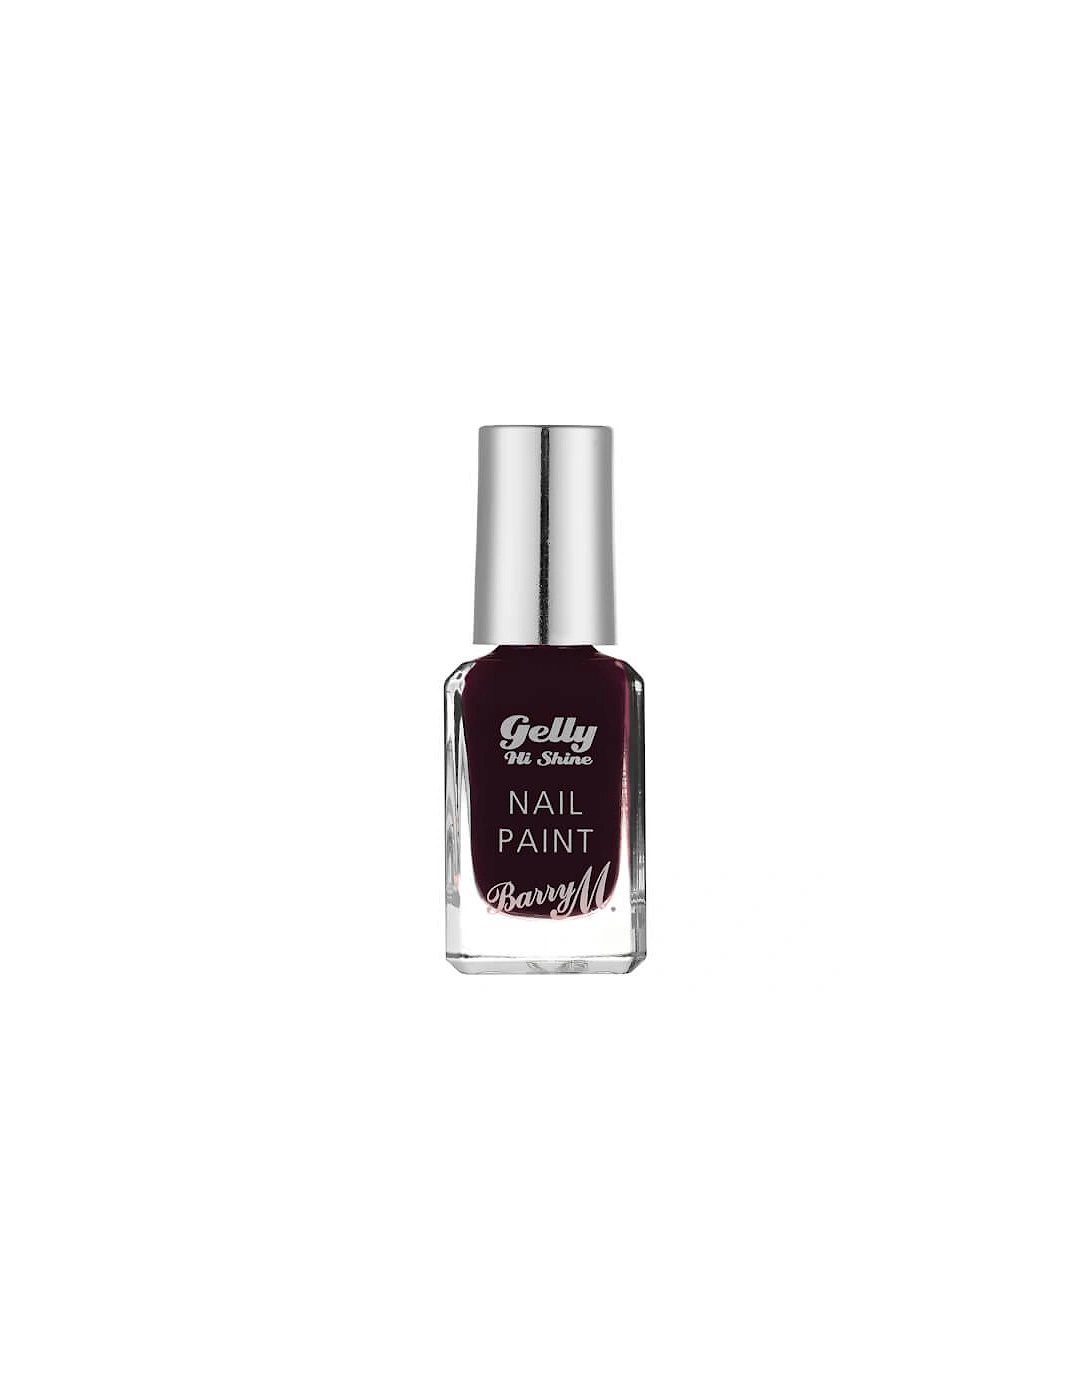 Gelly Nail Paint - Bluebell